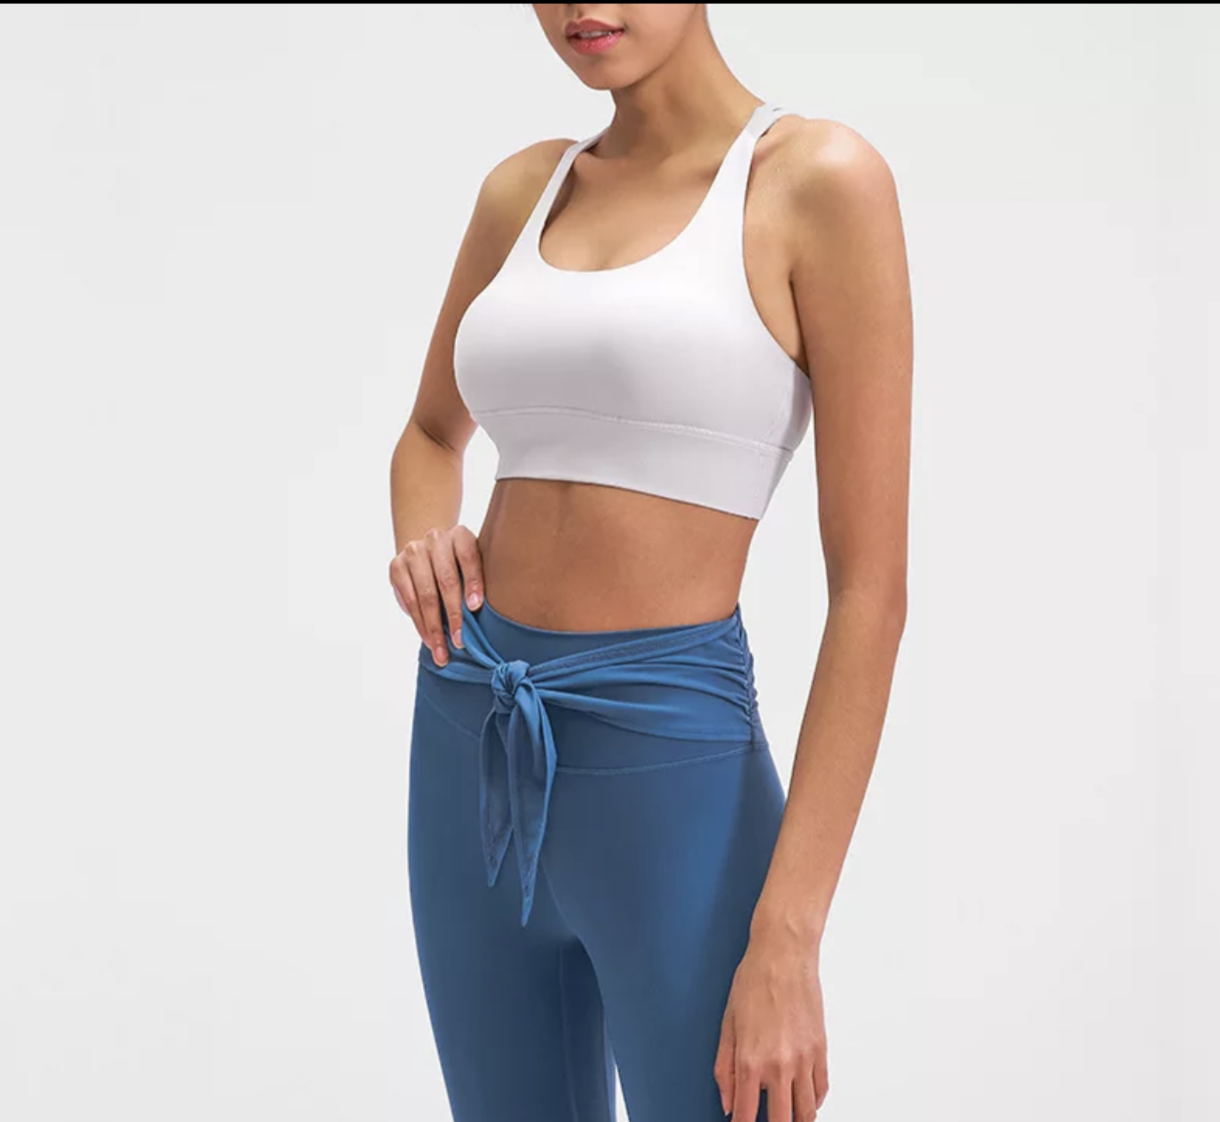 Stock  Offers, Women's Sports Bras. Find Athletic Crop Tops for